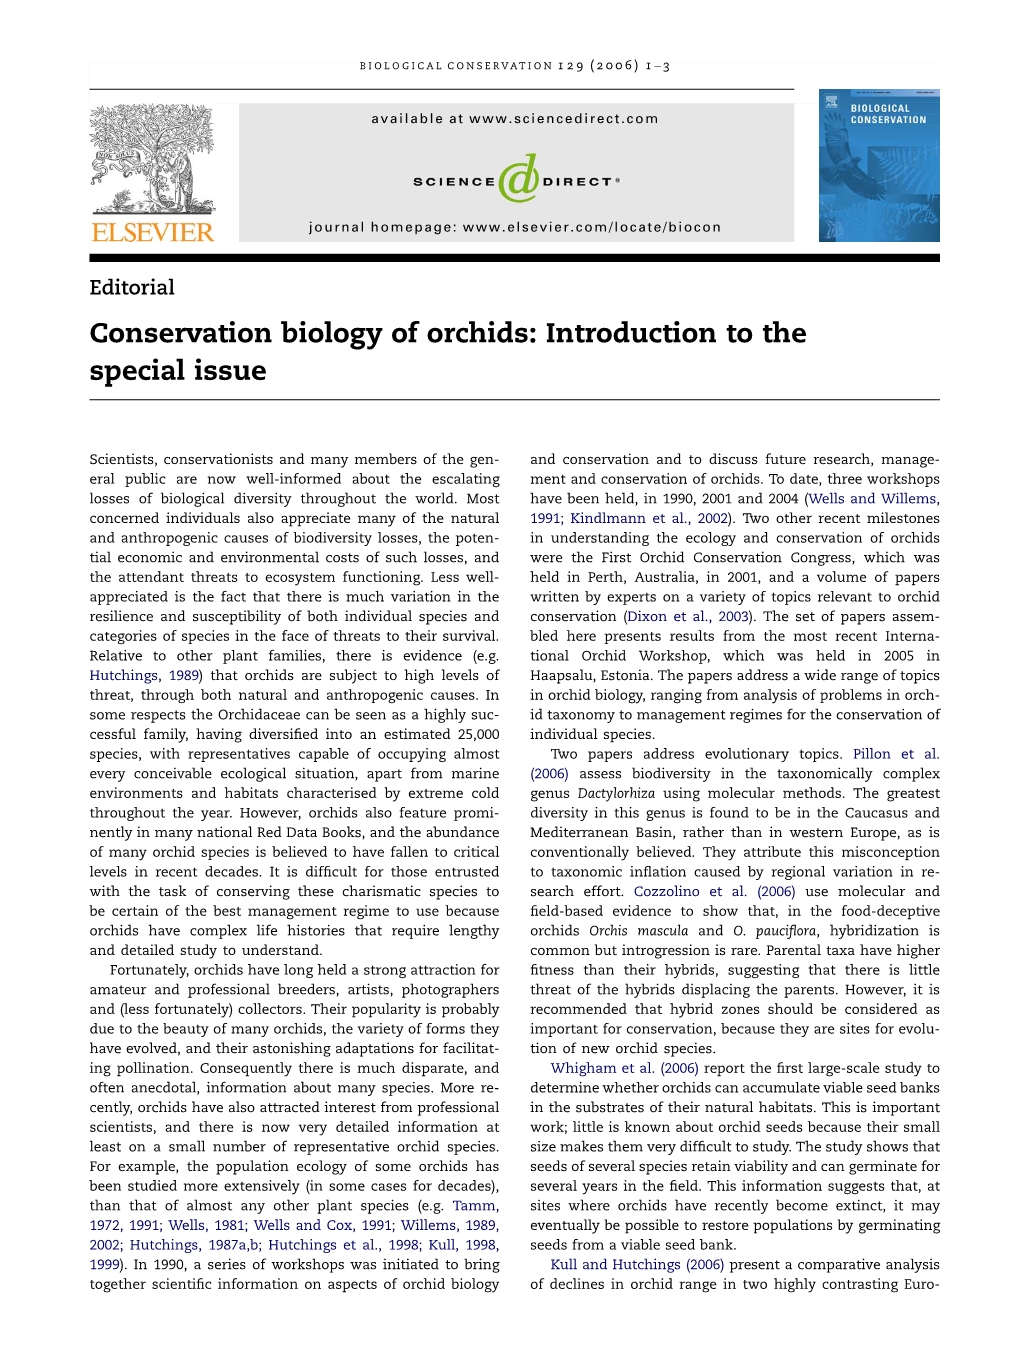 Conservation Biology of Orchids: Introduction to the Special Issue